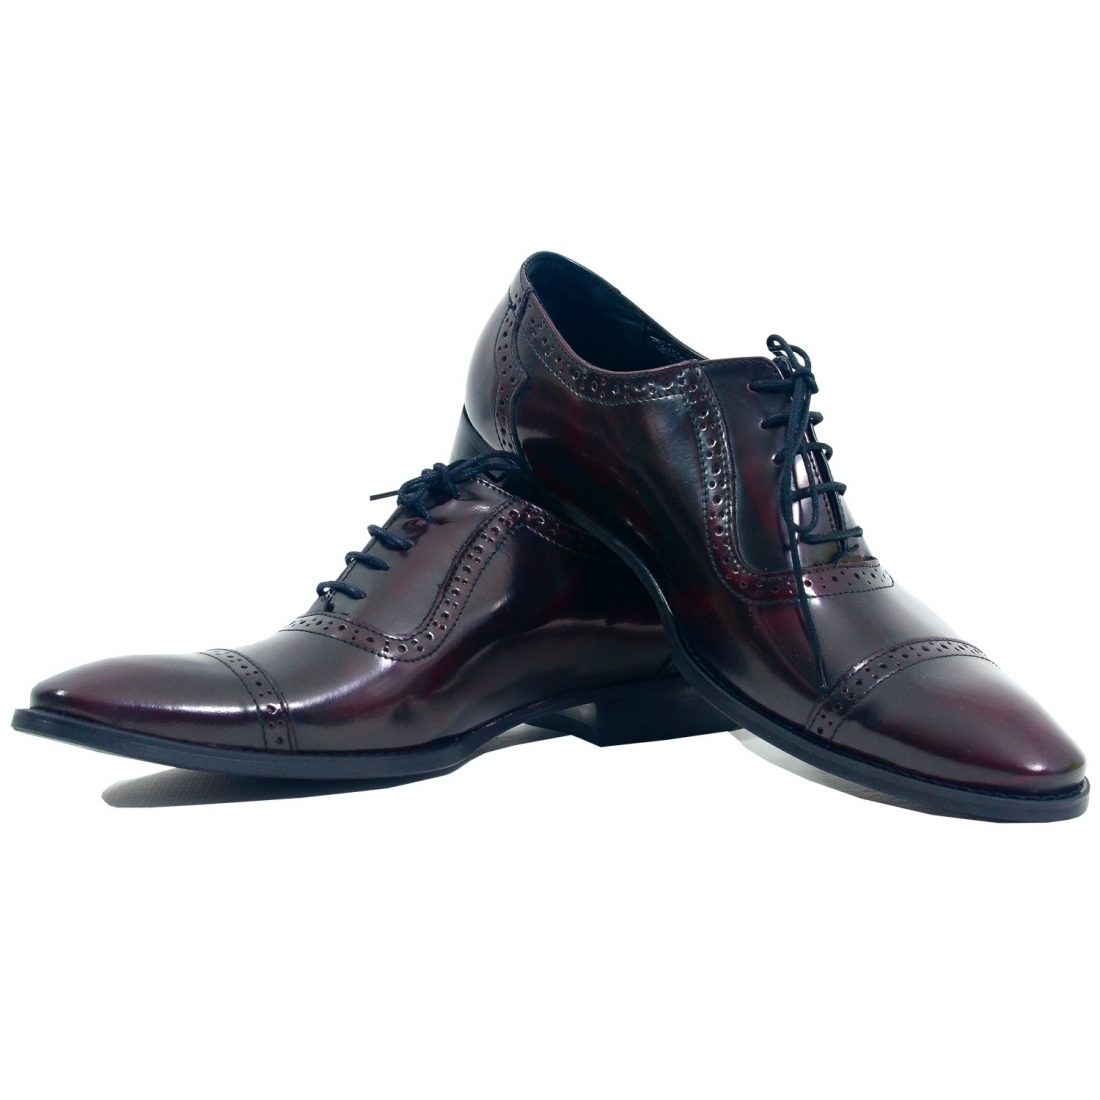 Modello Moeth - Chaussure Classique - Handmade Colorful Italian Leather Shoes